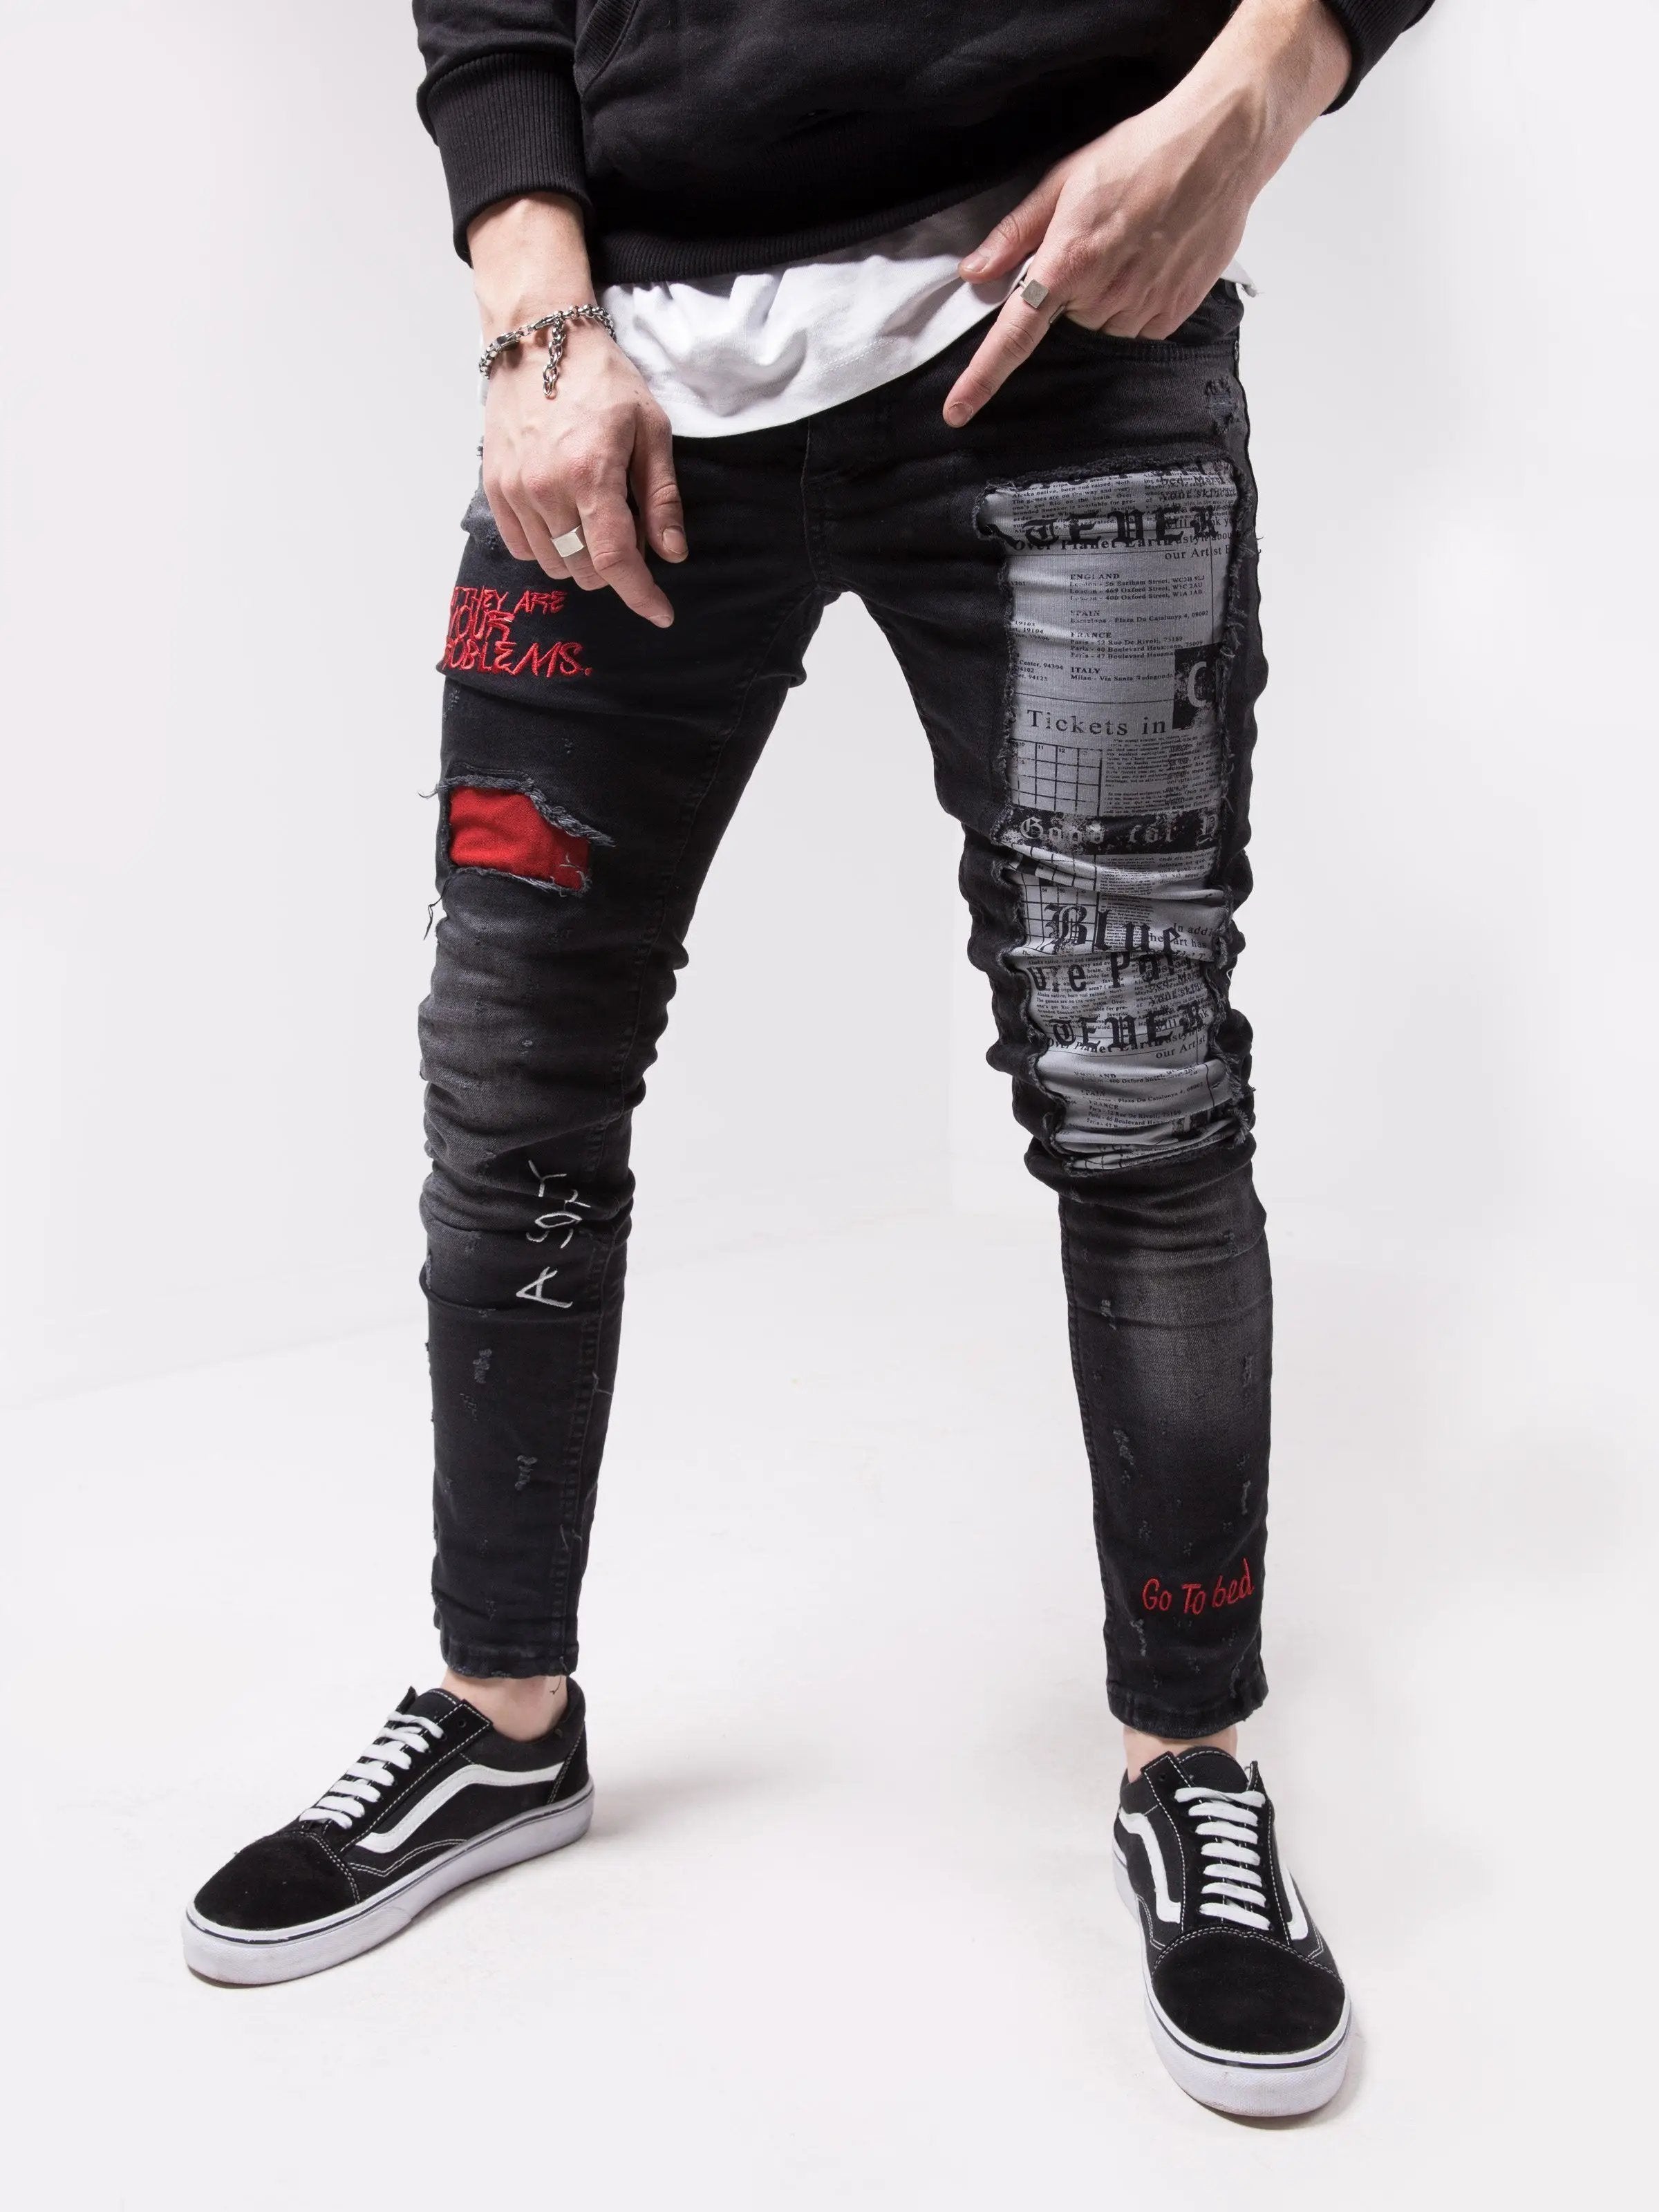 A man wearing a pair of black SKYSCRAPER jeans with red patches.